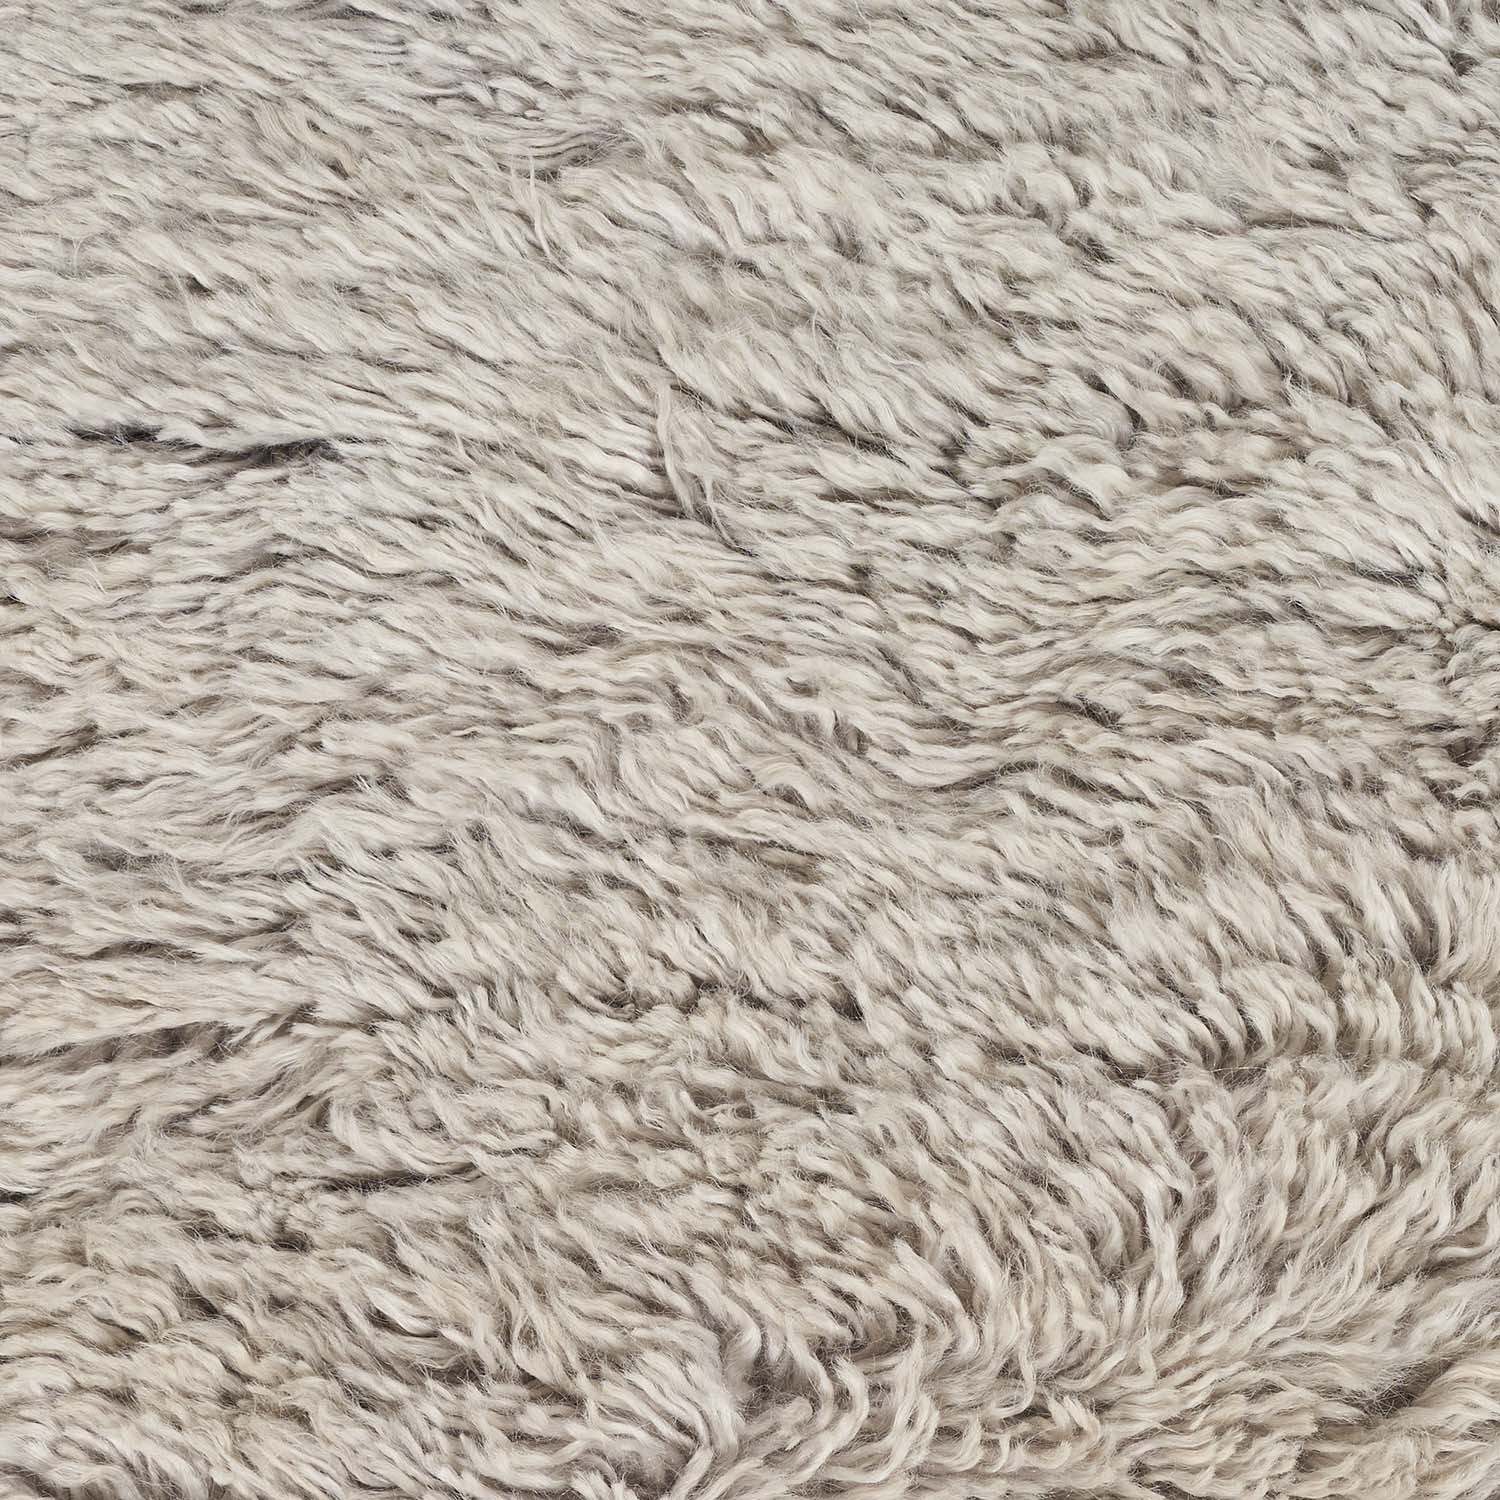 Close-up of long, wavy beige fur with subtle shading variations.